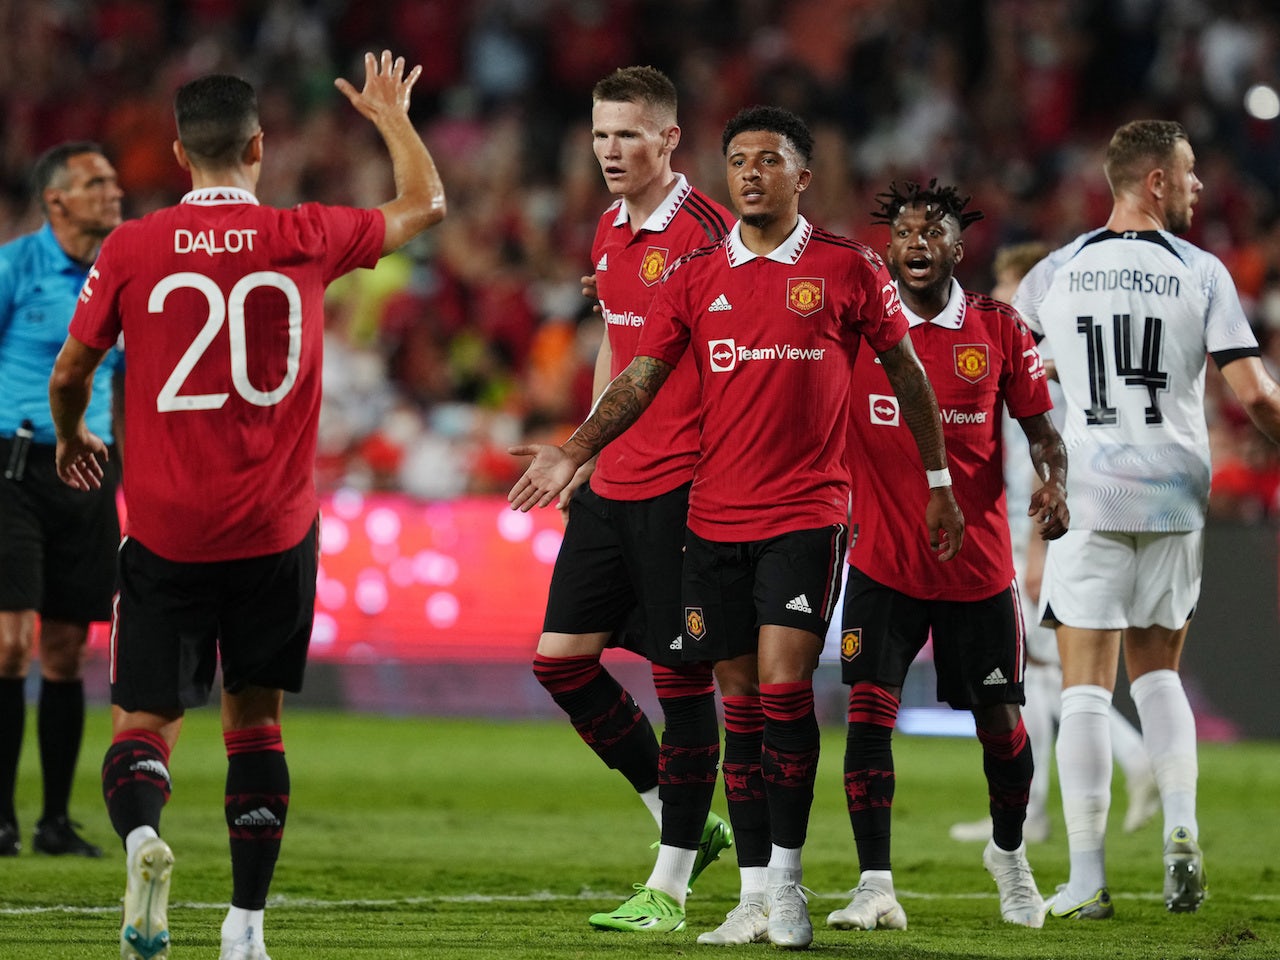 Preview: Melbourne Victory vs. Manchester United - prediction, team news, lineups